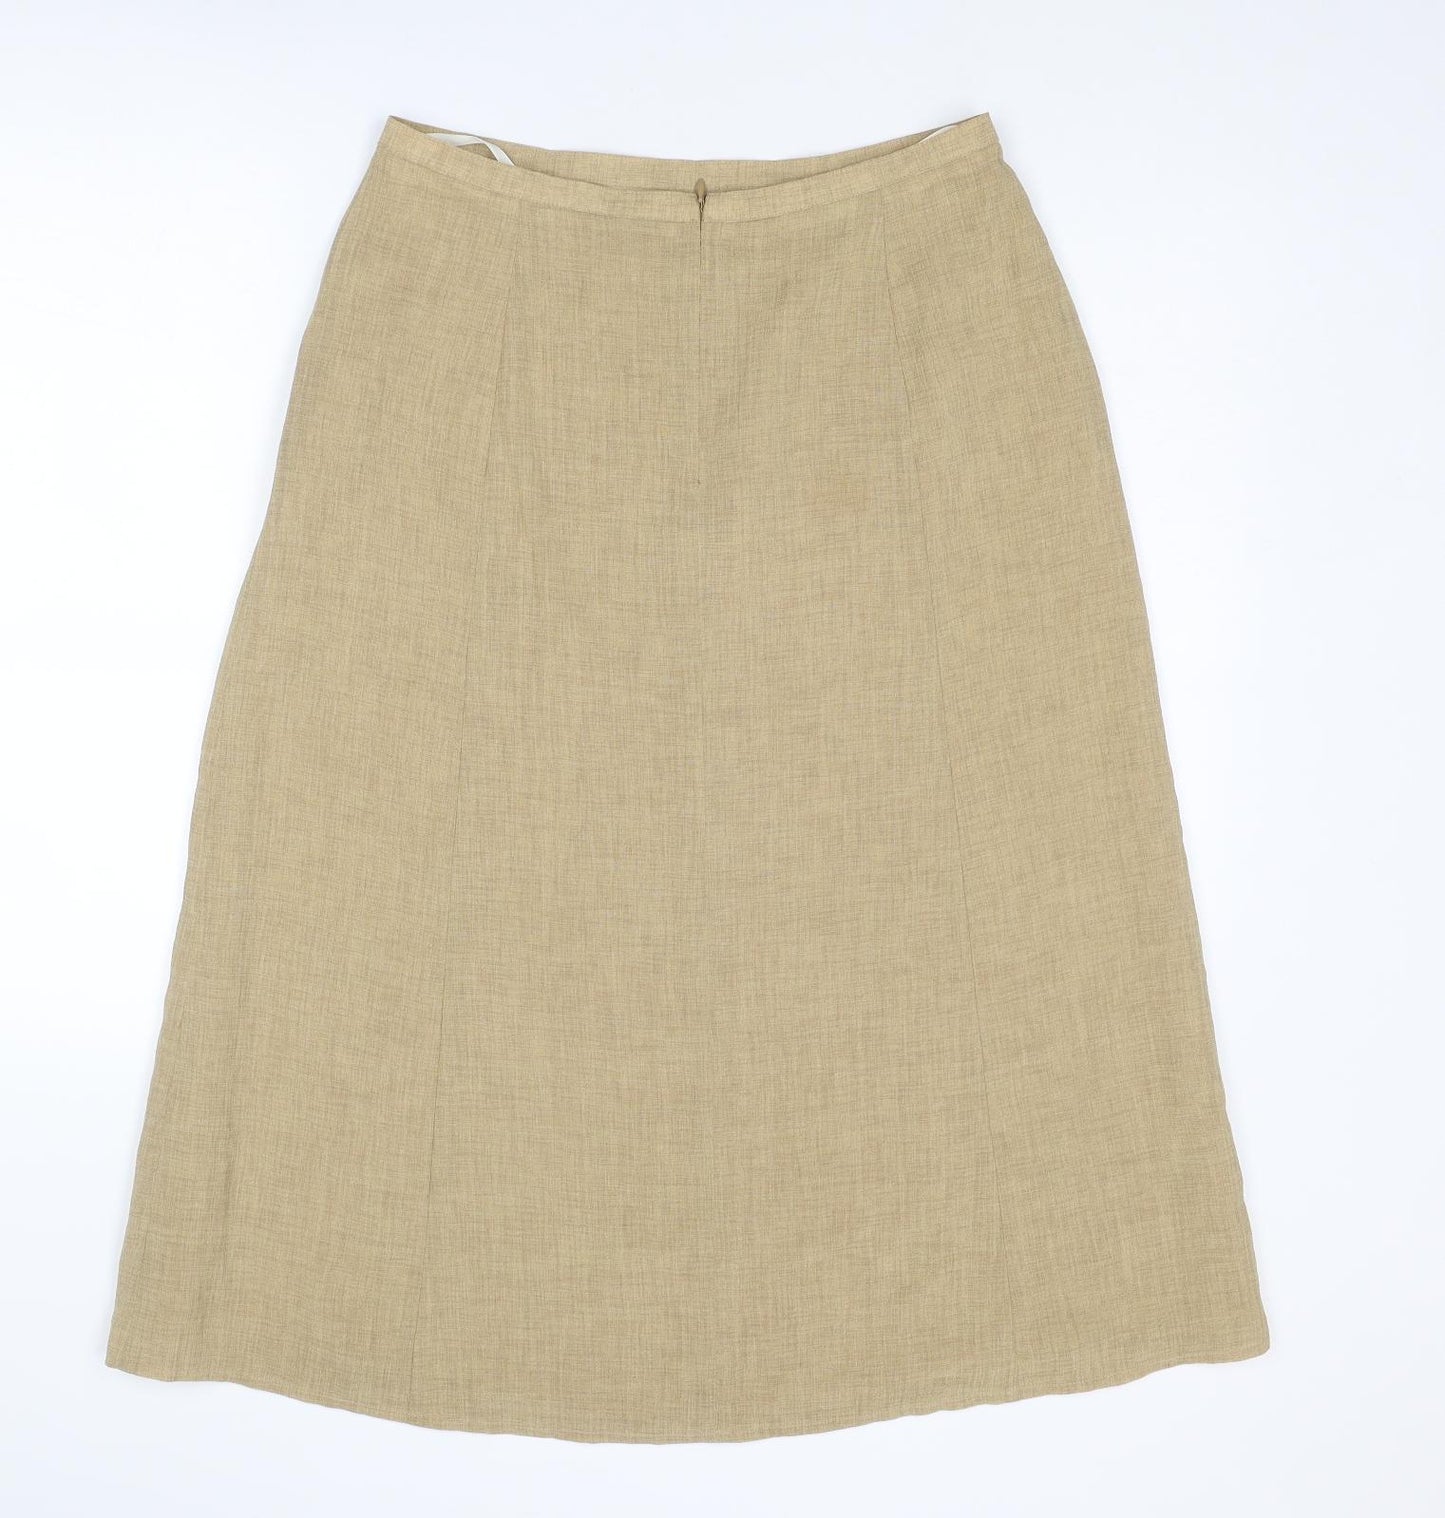 Collectables Womens Beige Acetate A-Line Skirt Size 14 Zip